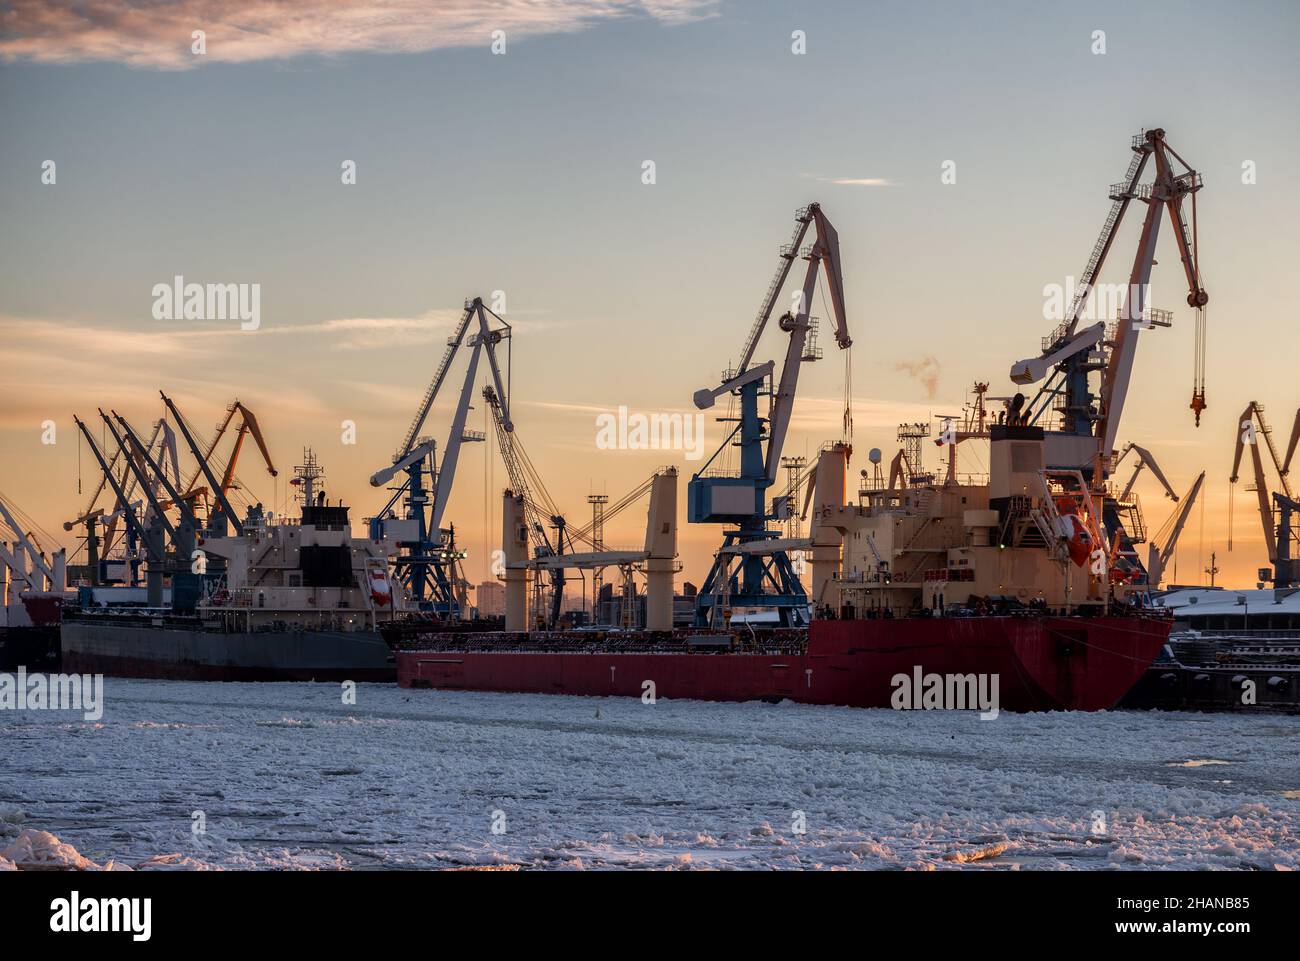 Sea cargo port in winter. Dry cargo vessels at the berth with harbor cranes Stock Photo